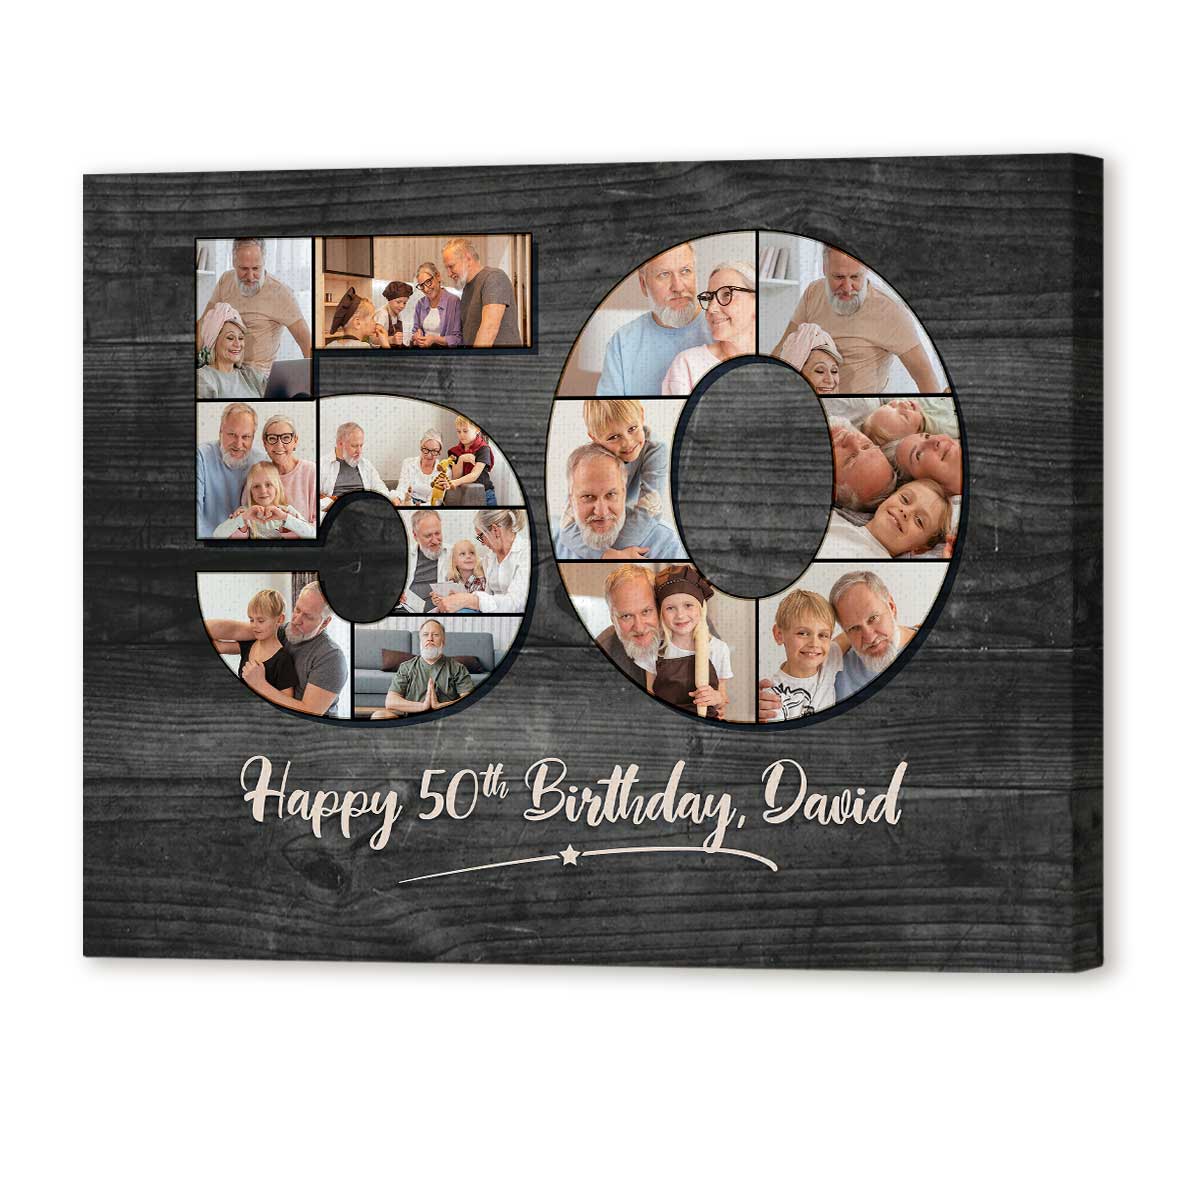 Personalized 50th Birthday Gift For Men, 50th Birthday Custom Photo Collage  Canvas, 50th Birthday Gifts for Dad - Framed Canvas, 30x40 inches